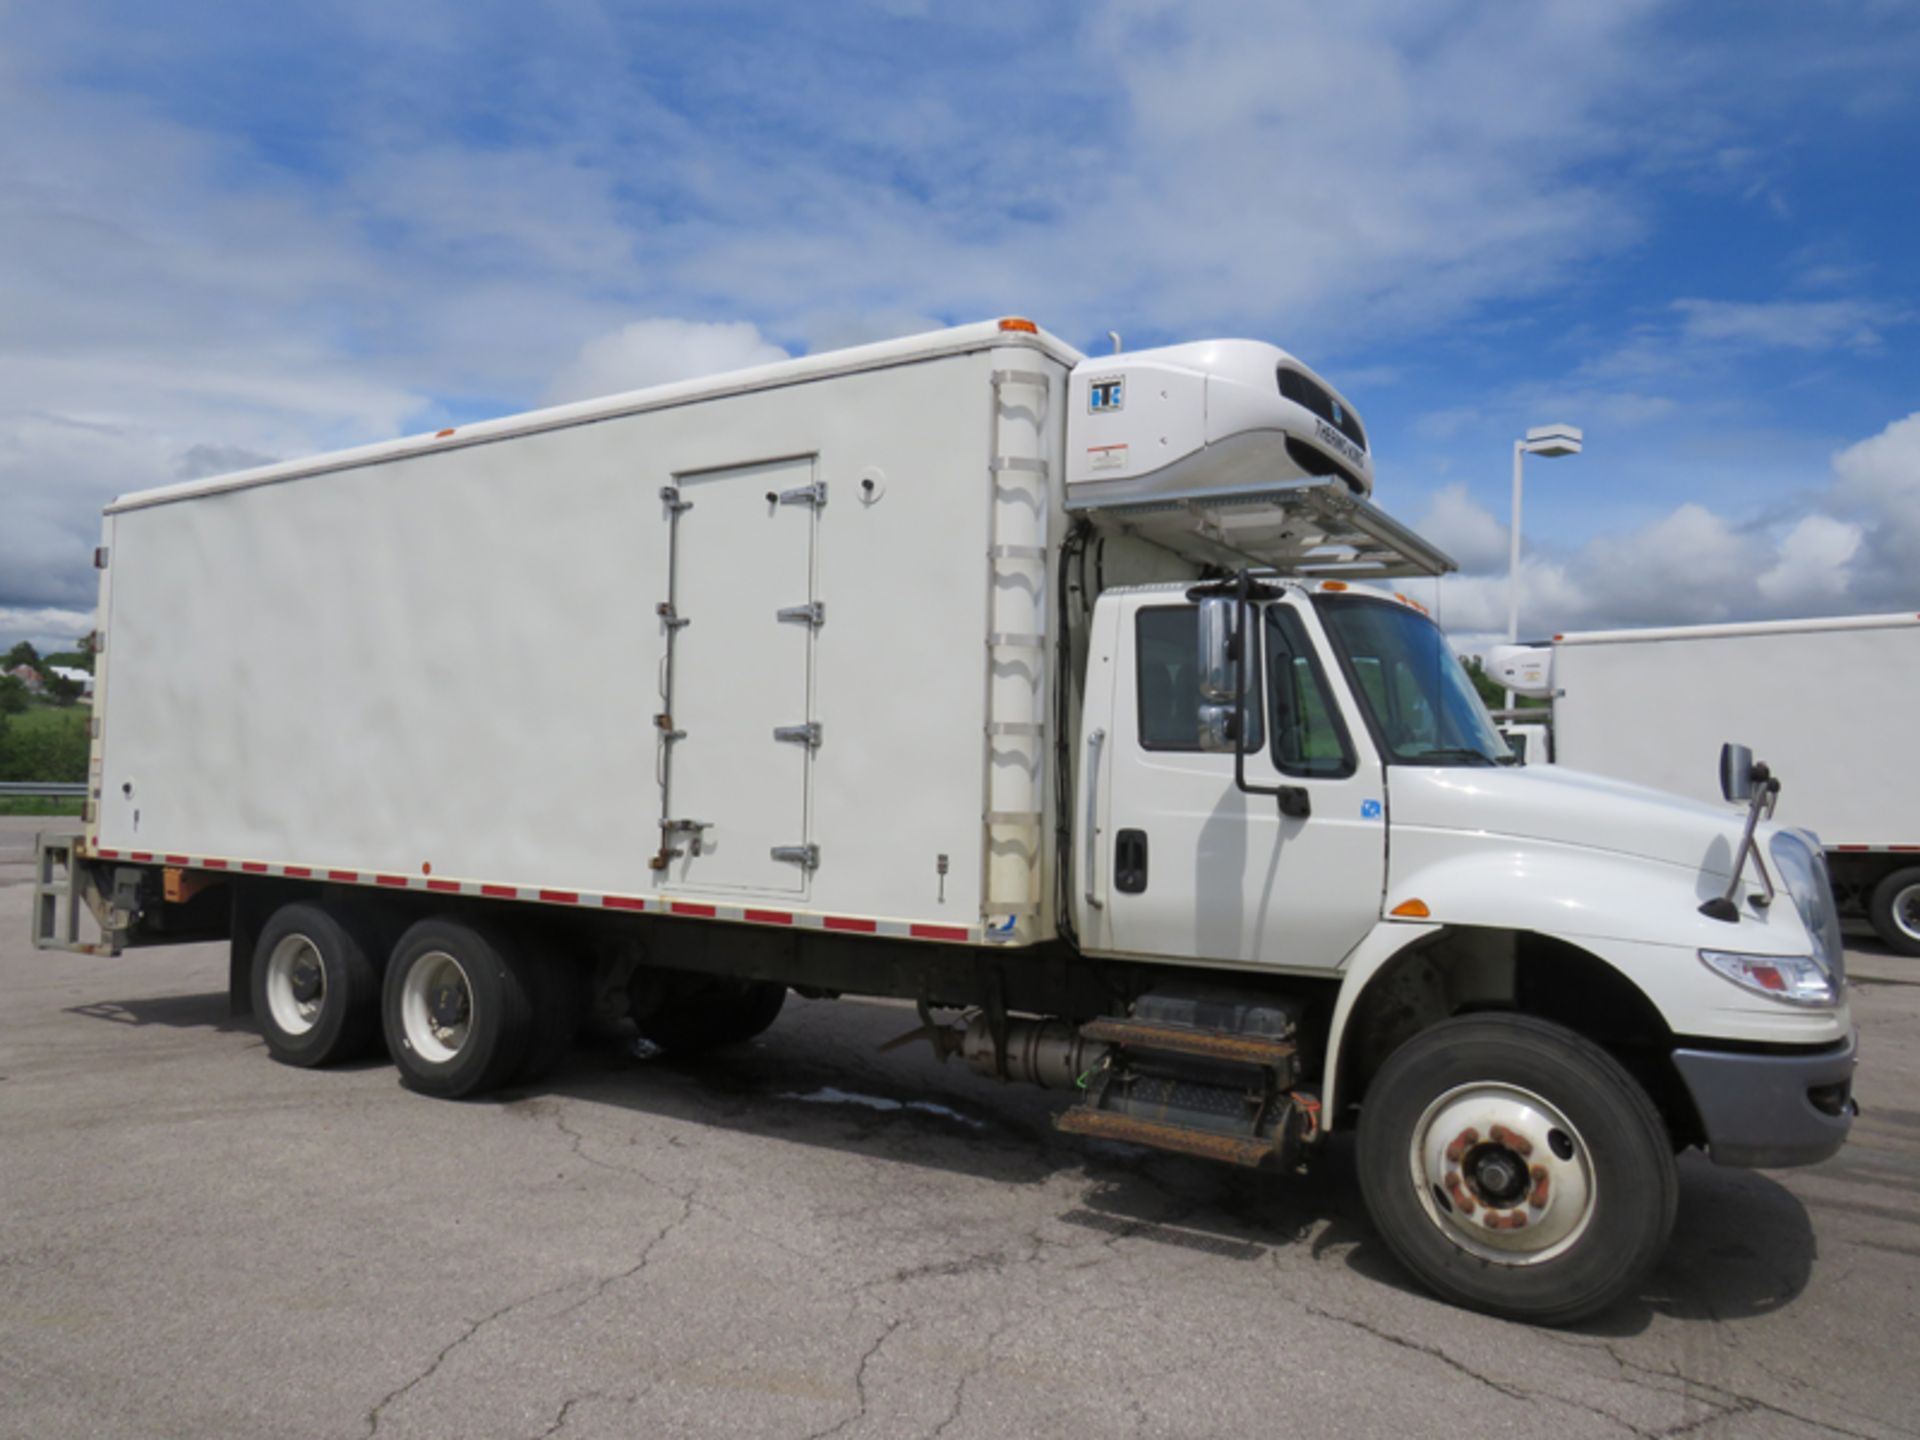 2018 INTERNATIONAL 4400 SBA 6X4 REFRIGERATED BOX TRUCK VIN#: 1HTMSTAR8JH529714, Approx Miles: 43606, - Image 3 of 9